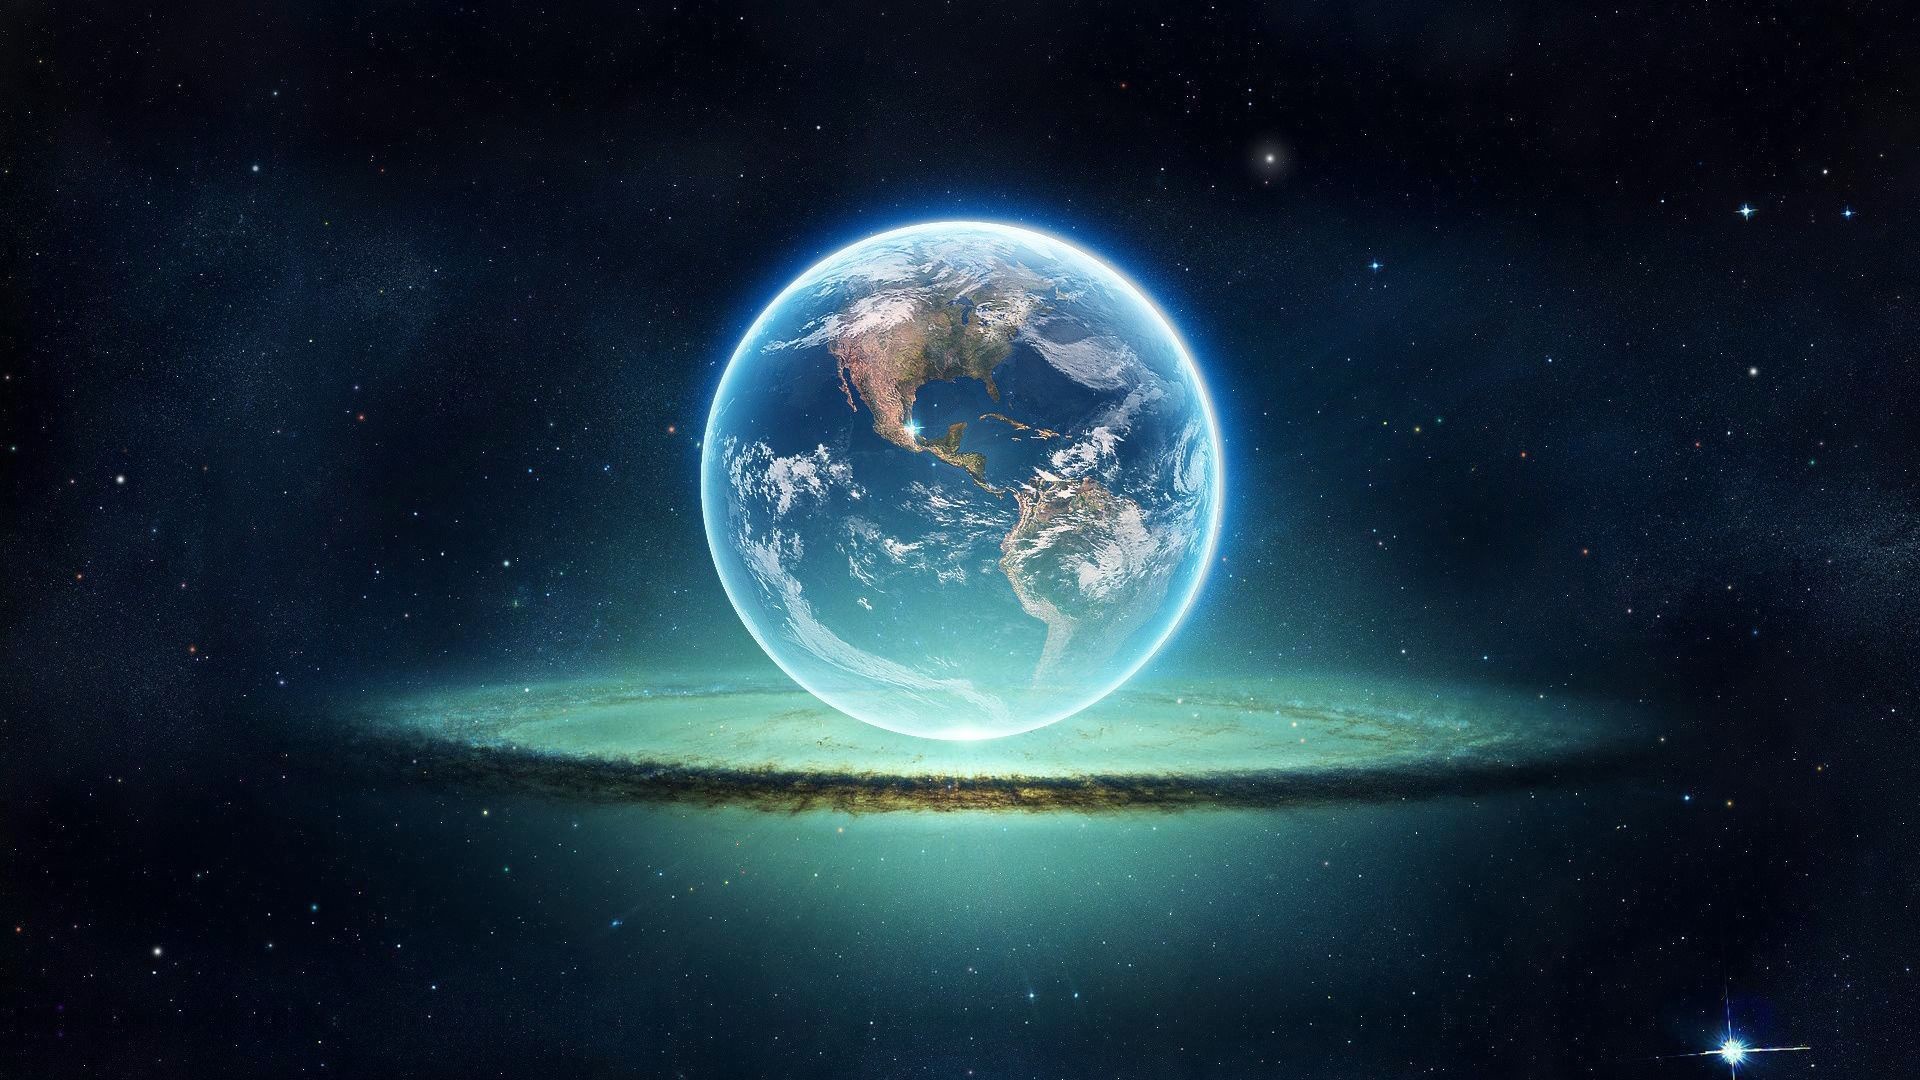 Earth Wallpaper HD 1080p (78+ images)